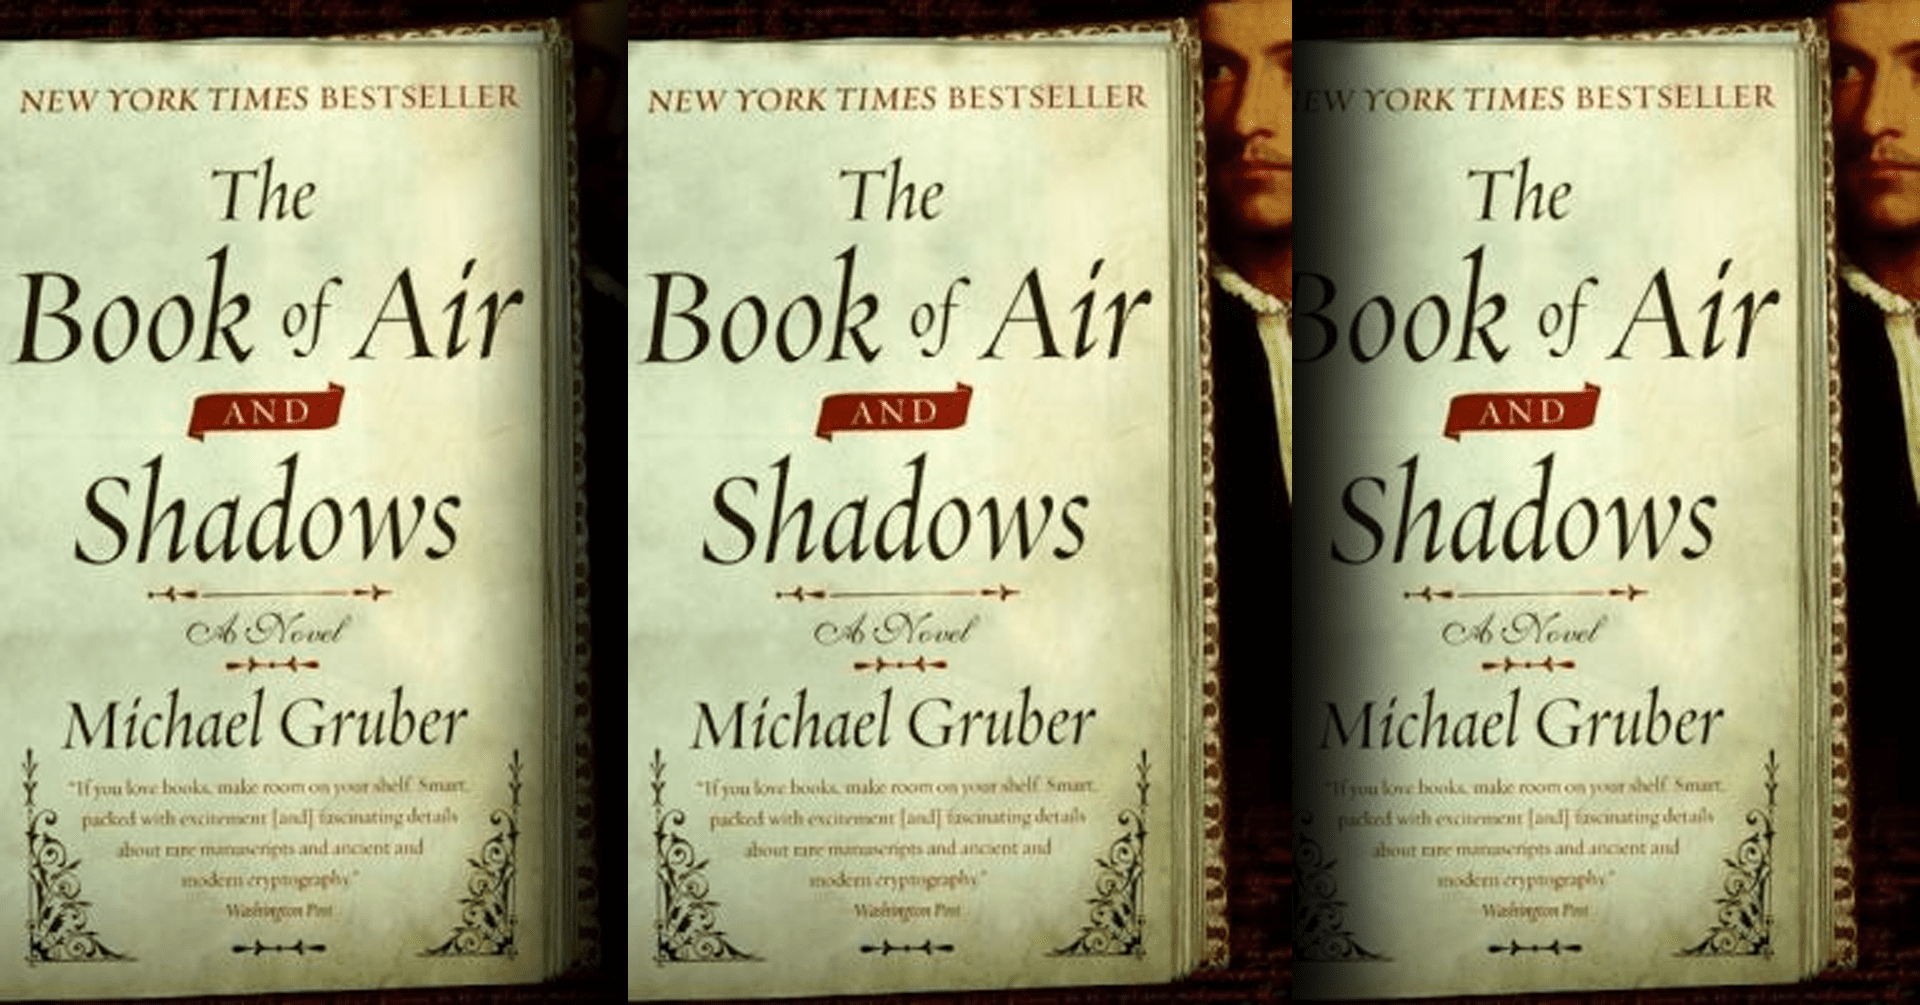 The Book of Air and Shadows by Michael Gruber (book cover)